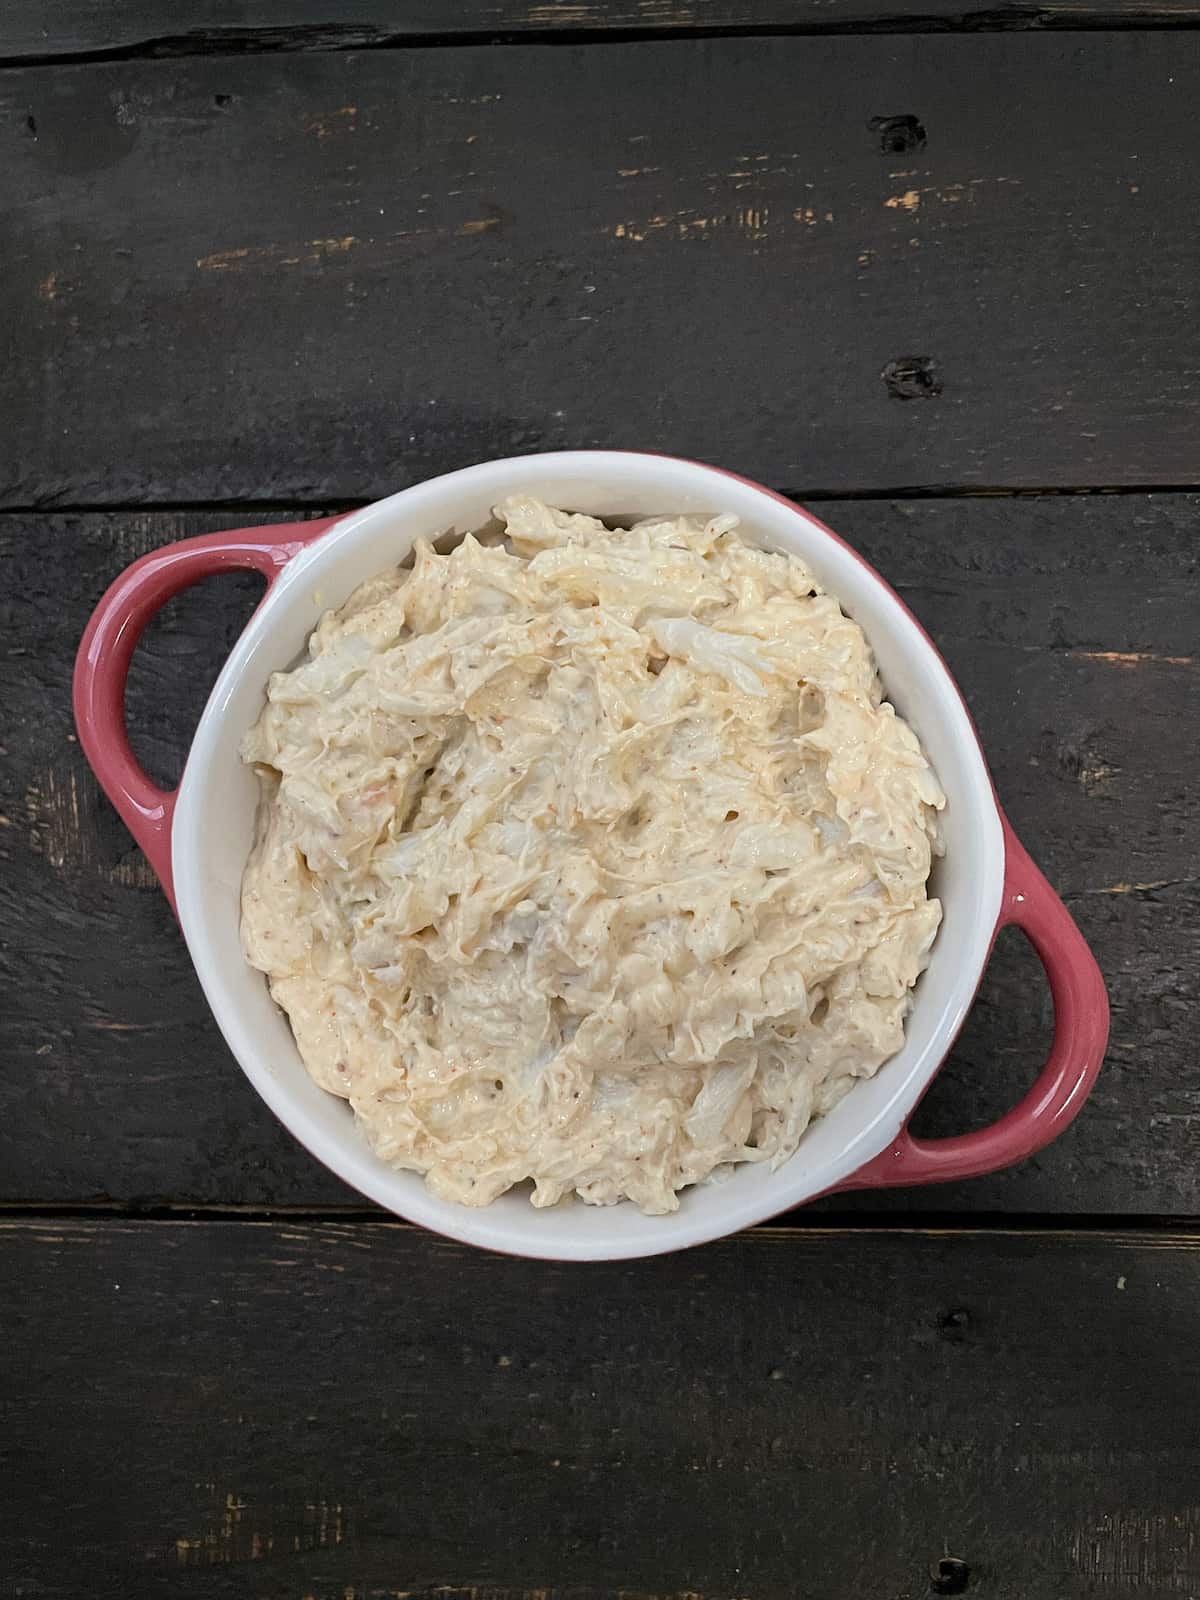 Crab dip in a dish before baking.